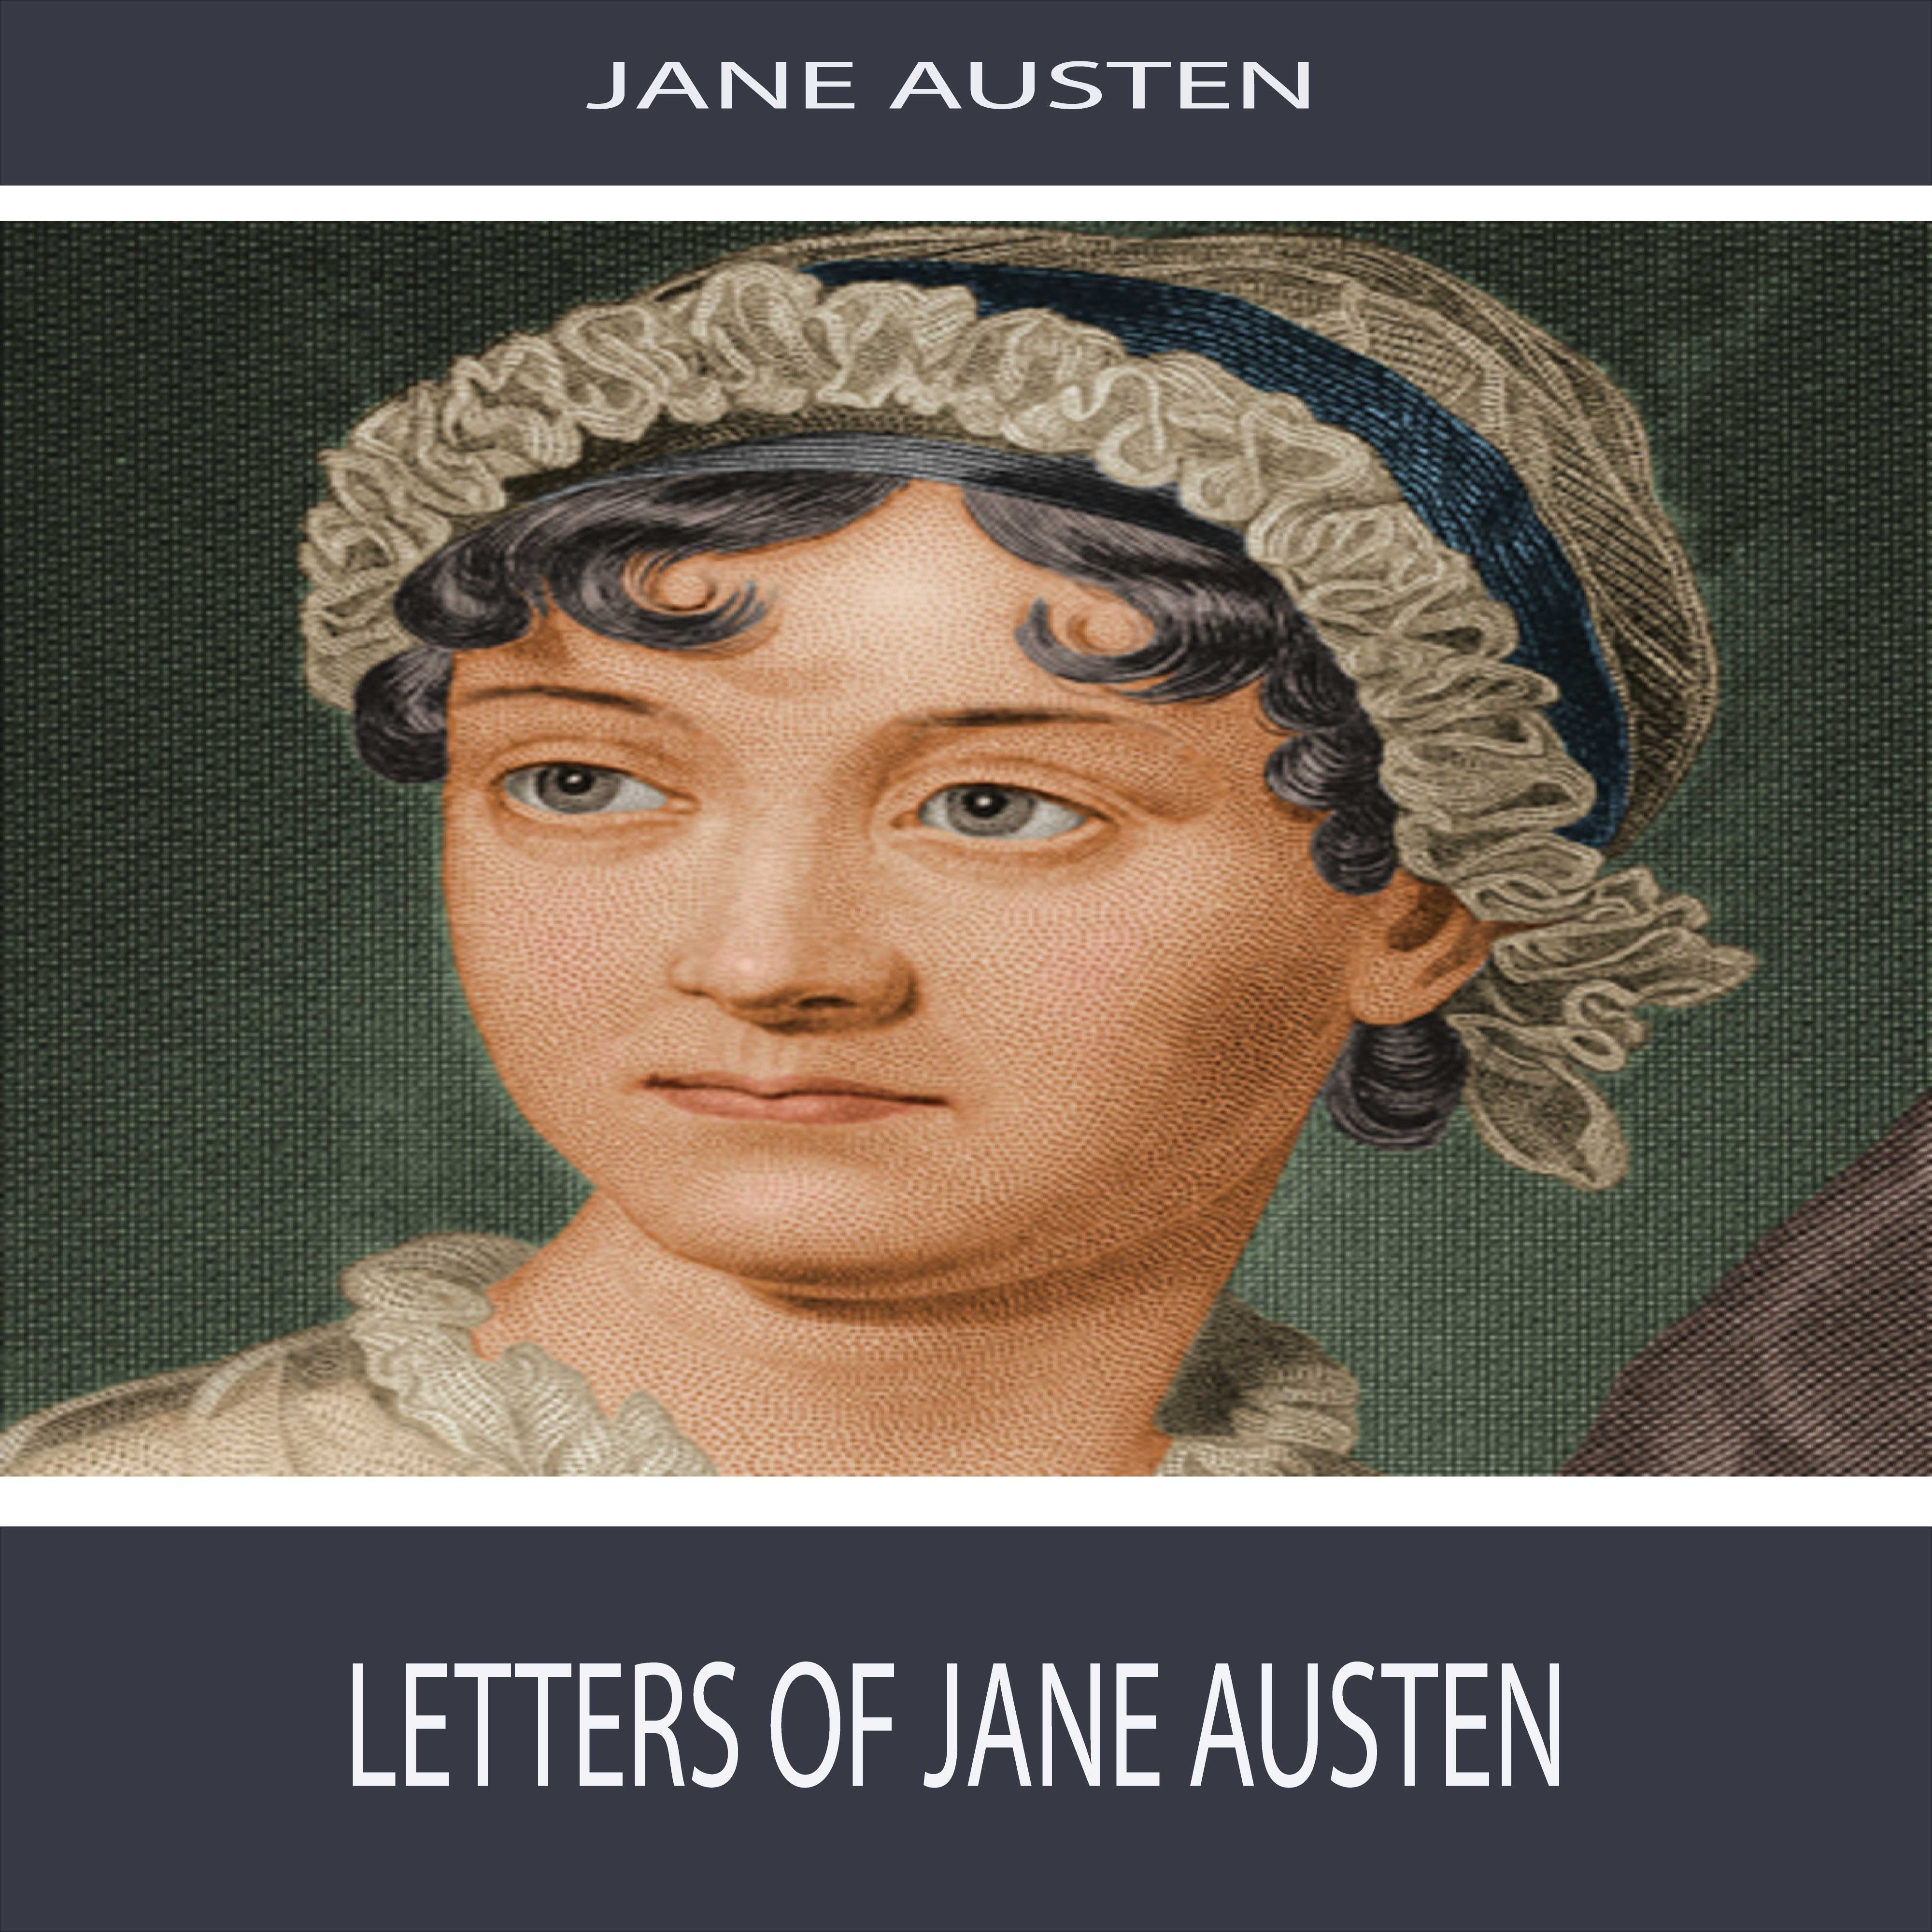 Letters of Jane Austen: Section 30